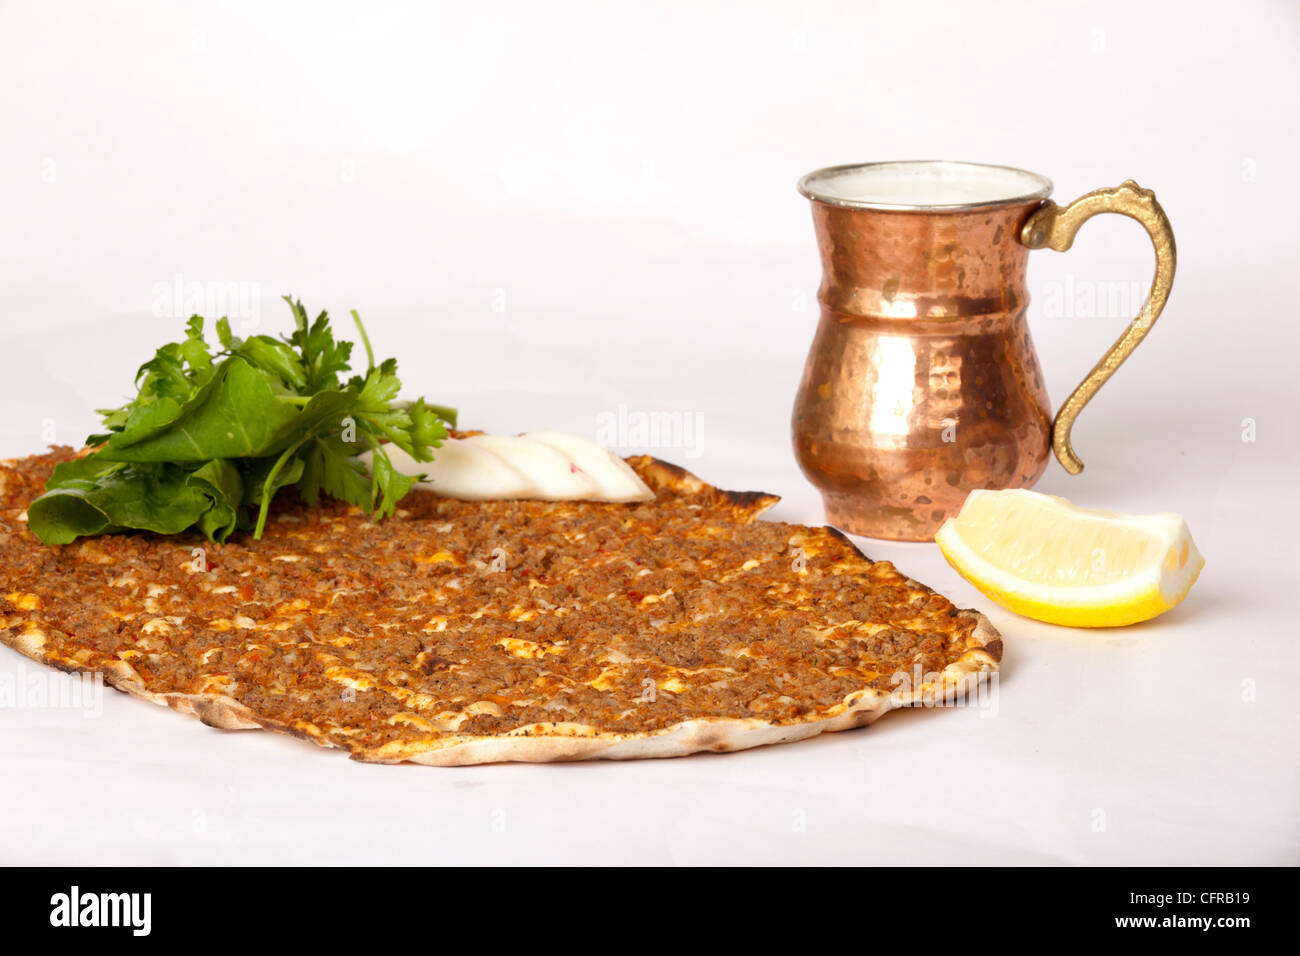 Delicious Turkish pizza lahmacun on isolated background Stock Photo